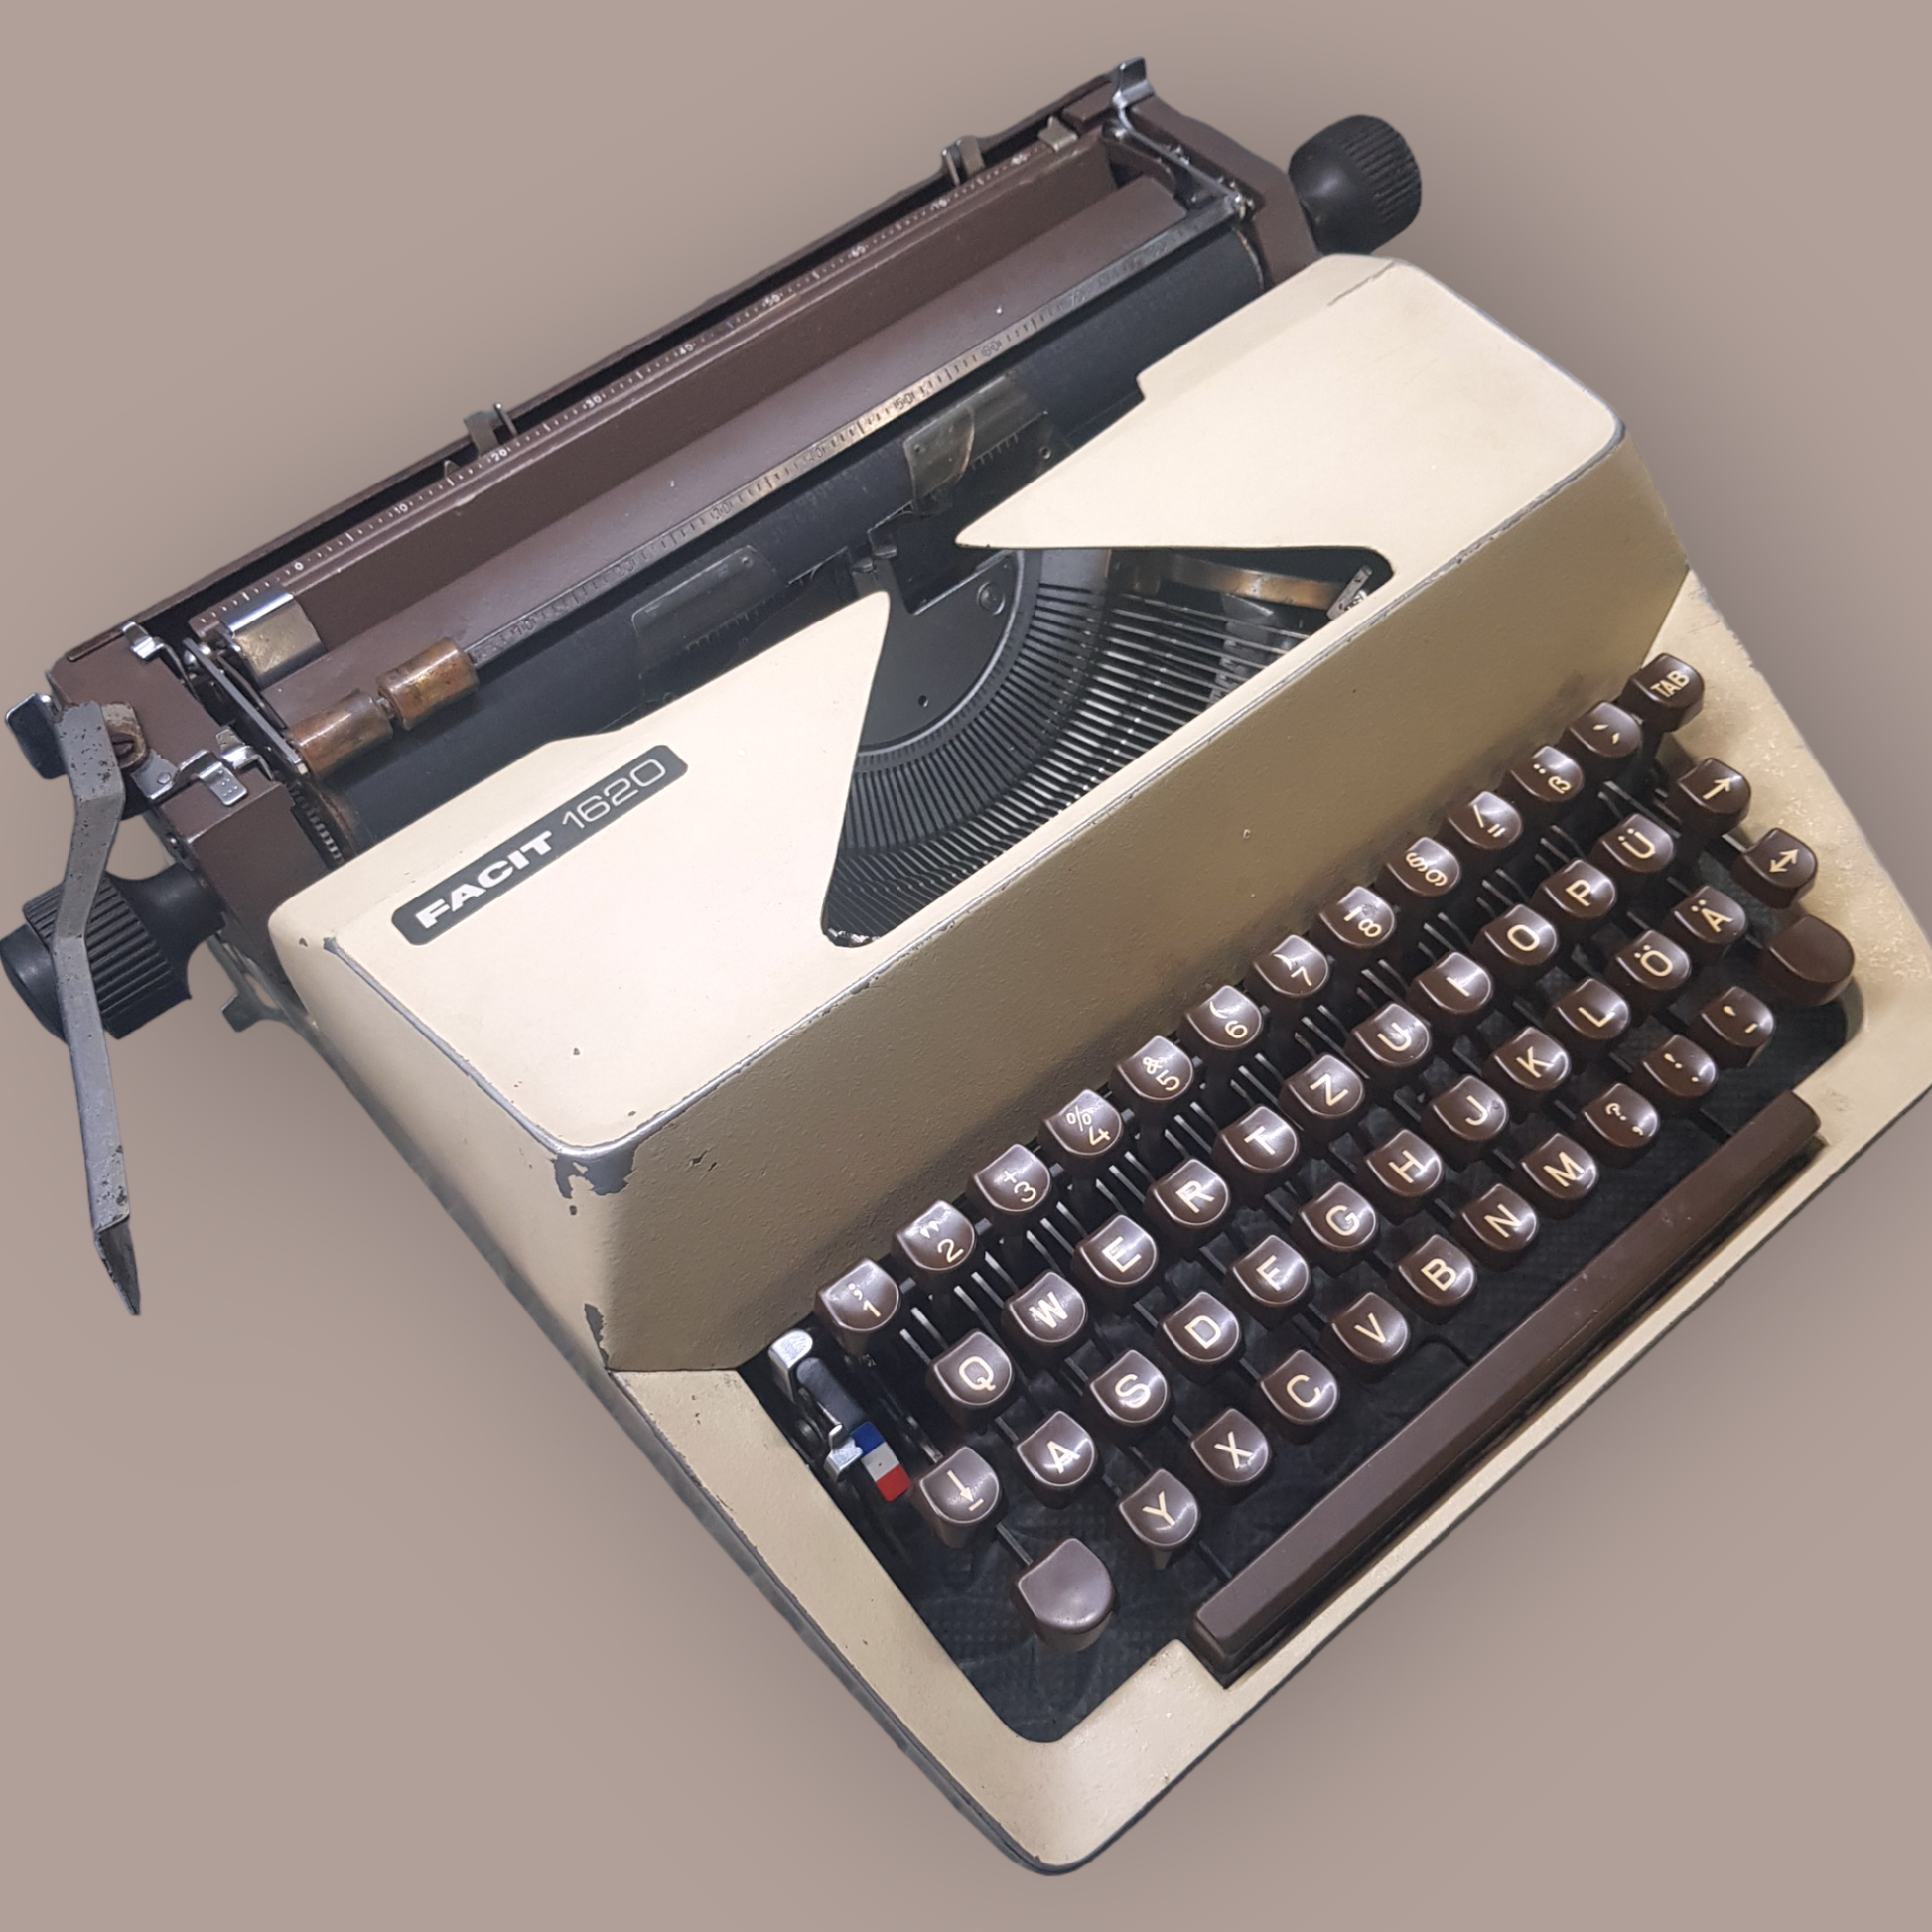 Image of Facit 1620 Typewriter. A Midsize, Rare, Portable Typewriter. Made in Switzerland. Available from universaltypewritercompany.in